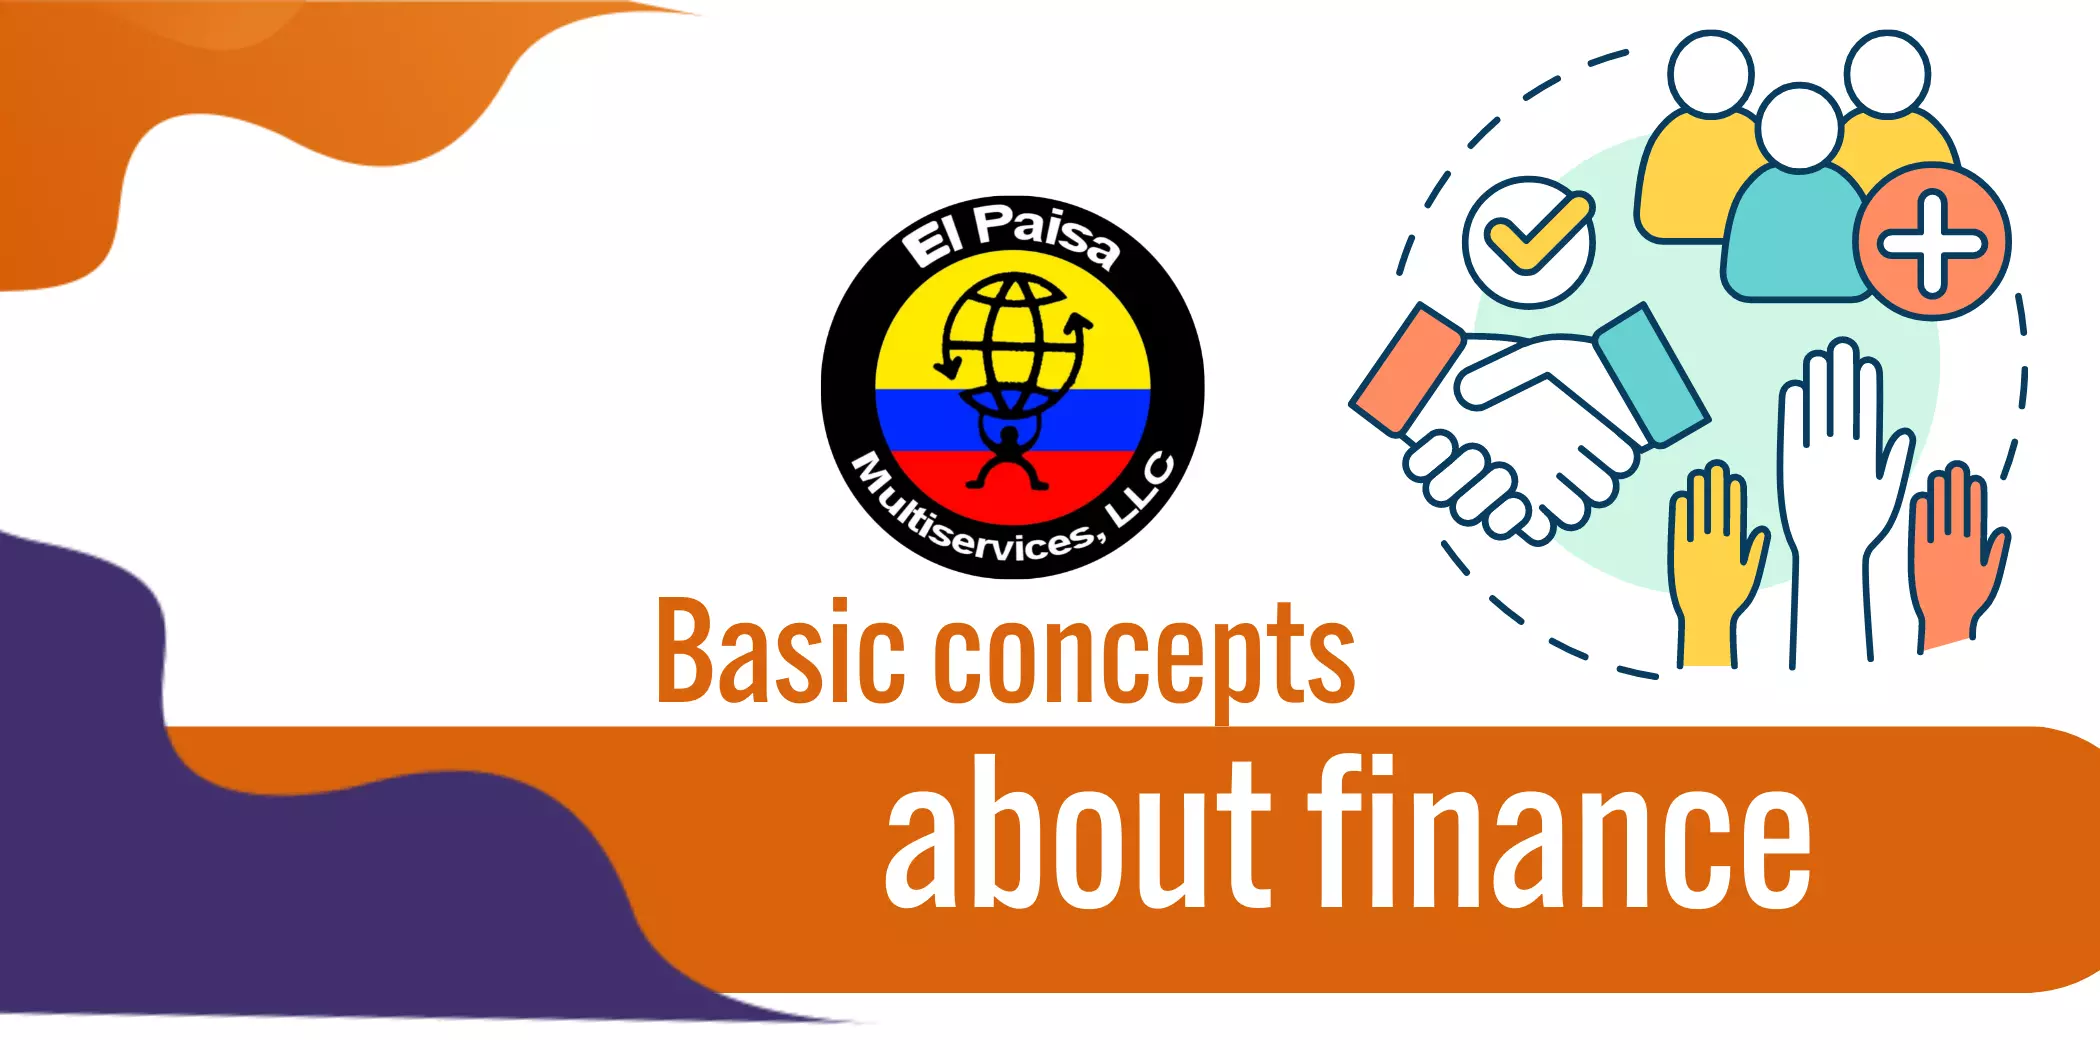 Basic concepts about finance 